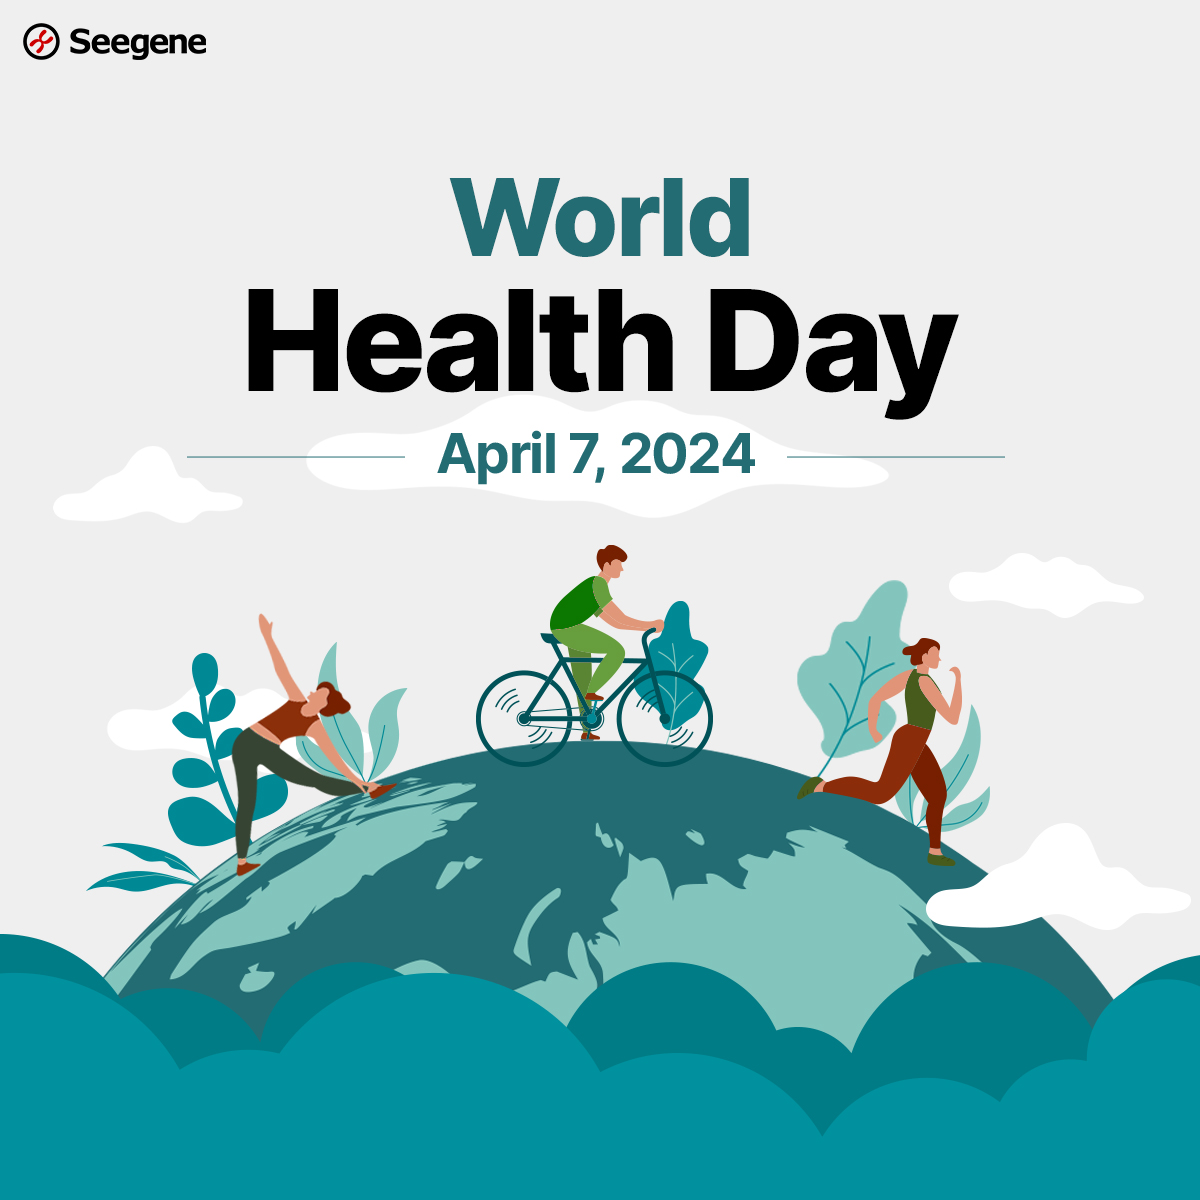 On this World Health Day, April 7, Seegene stands with the global community in marking the founding of WHO and highlighting 2024's theme: 'My health, my right.' We advocate for universal access to quality health services and information, emphasizing the importance of safe…